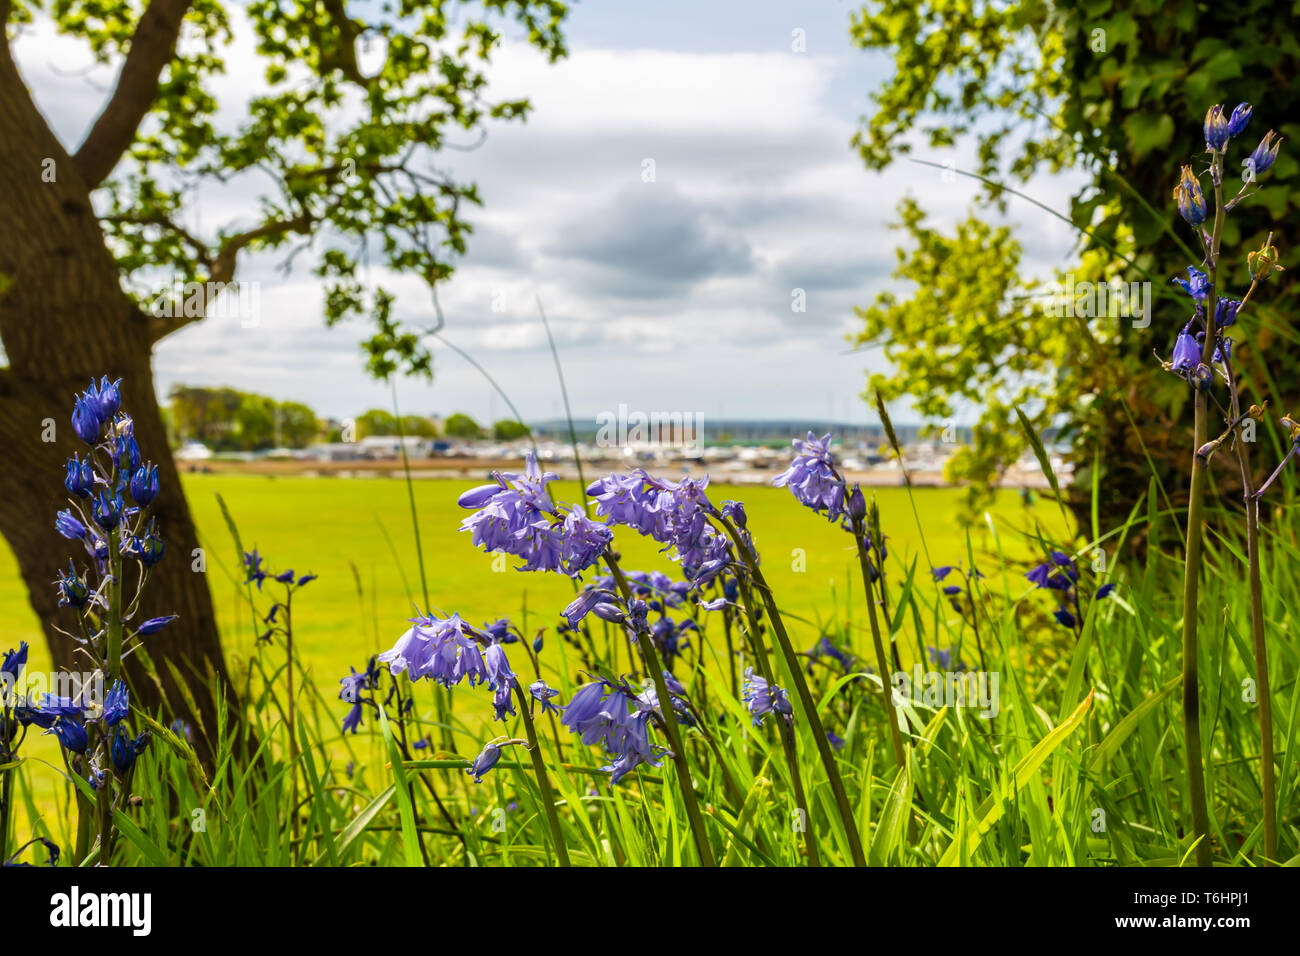 Colour landscape photograph of Spanish bluebells in bloom on bank overlooking playing field, taken on White cliff, Poole, Dorset, England. Stock Photo